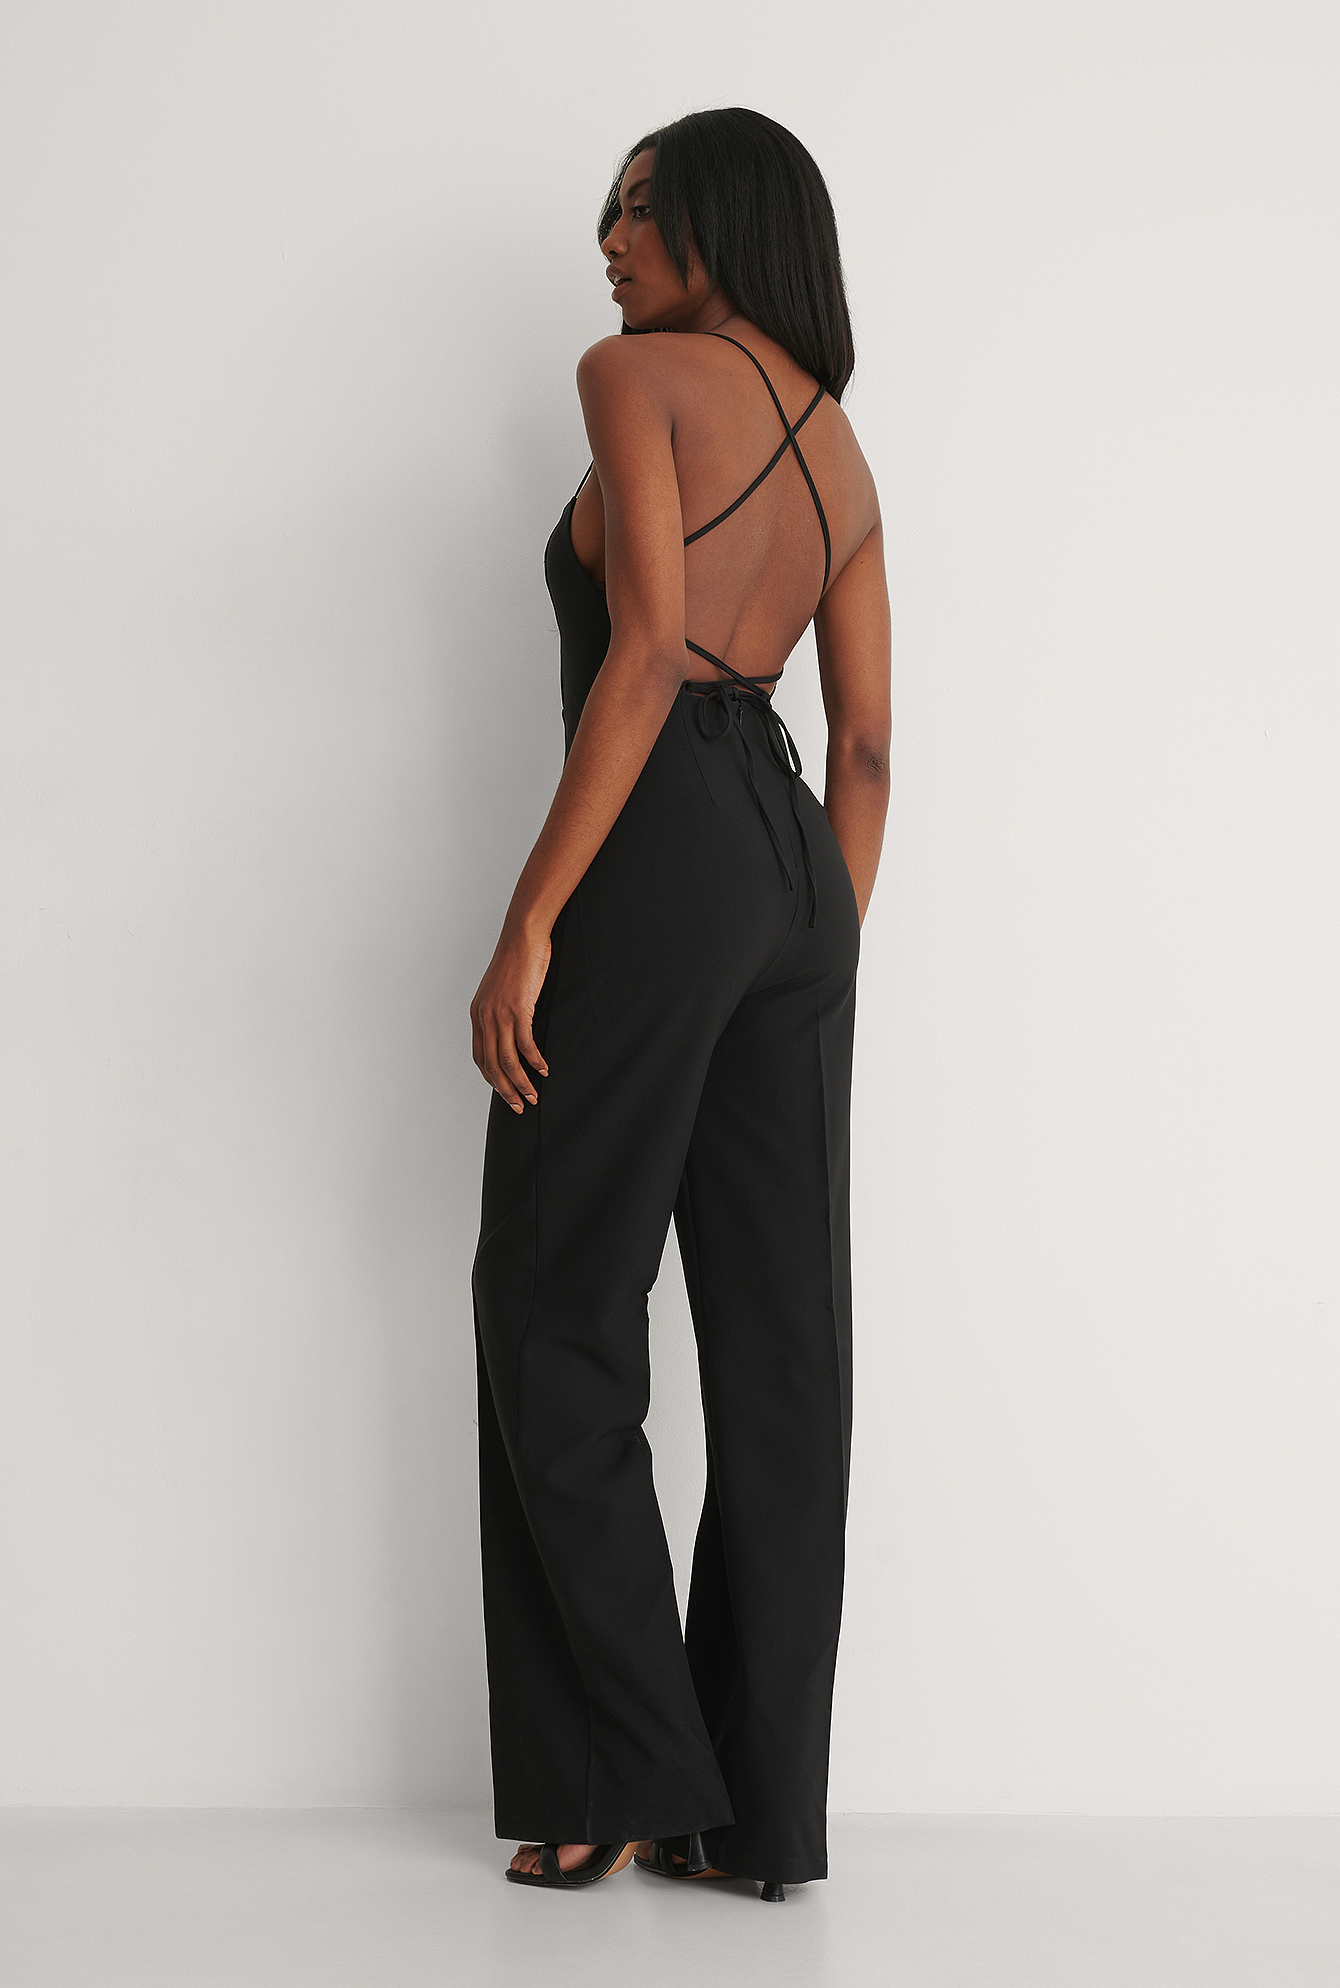 Belted Jumpsuit Outfit.